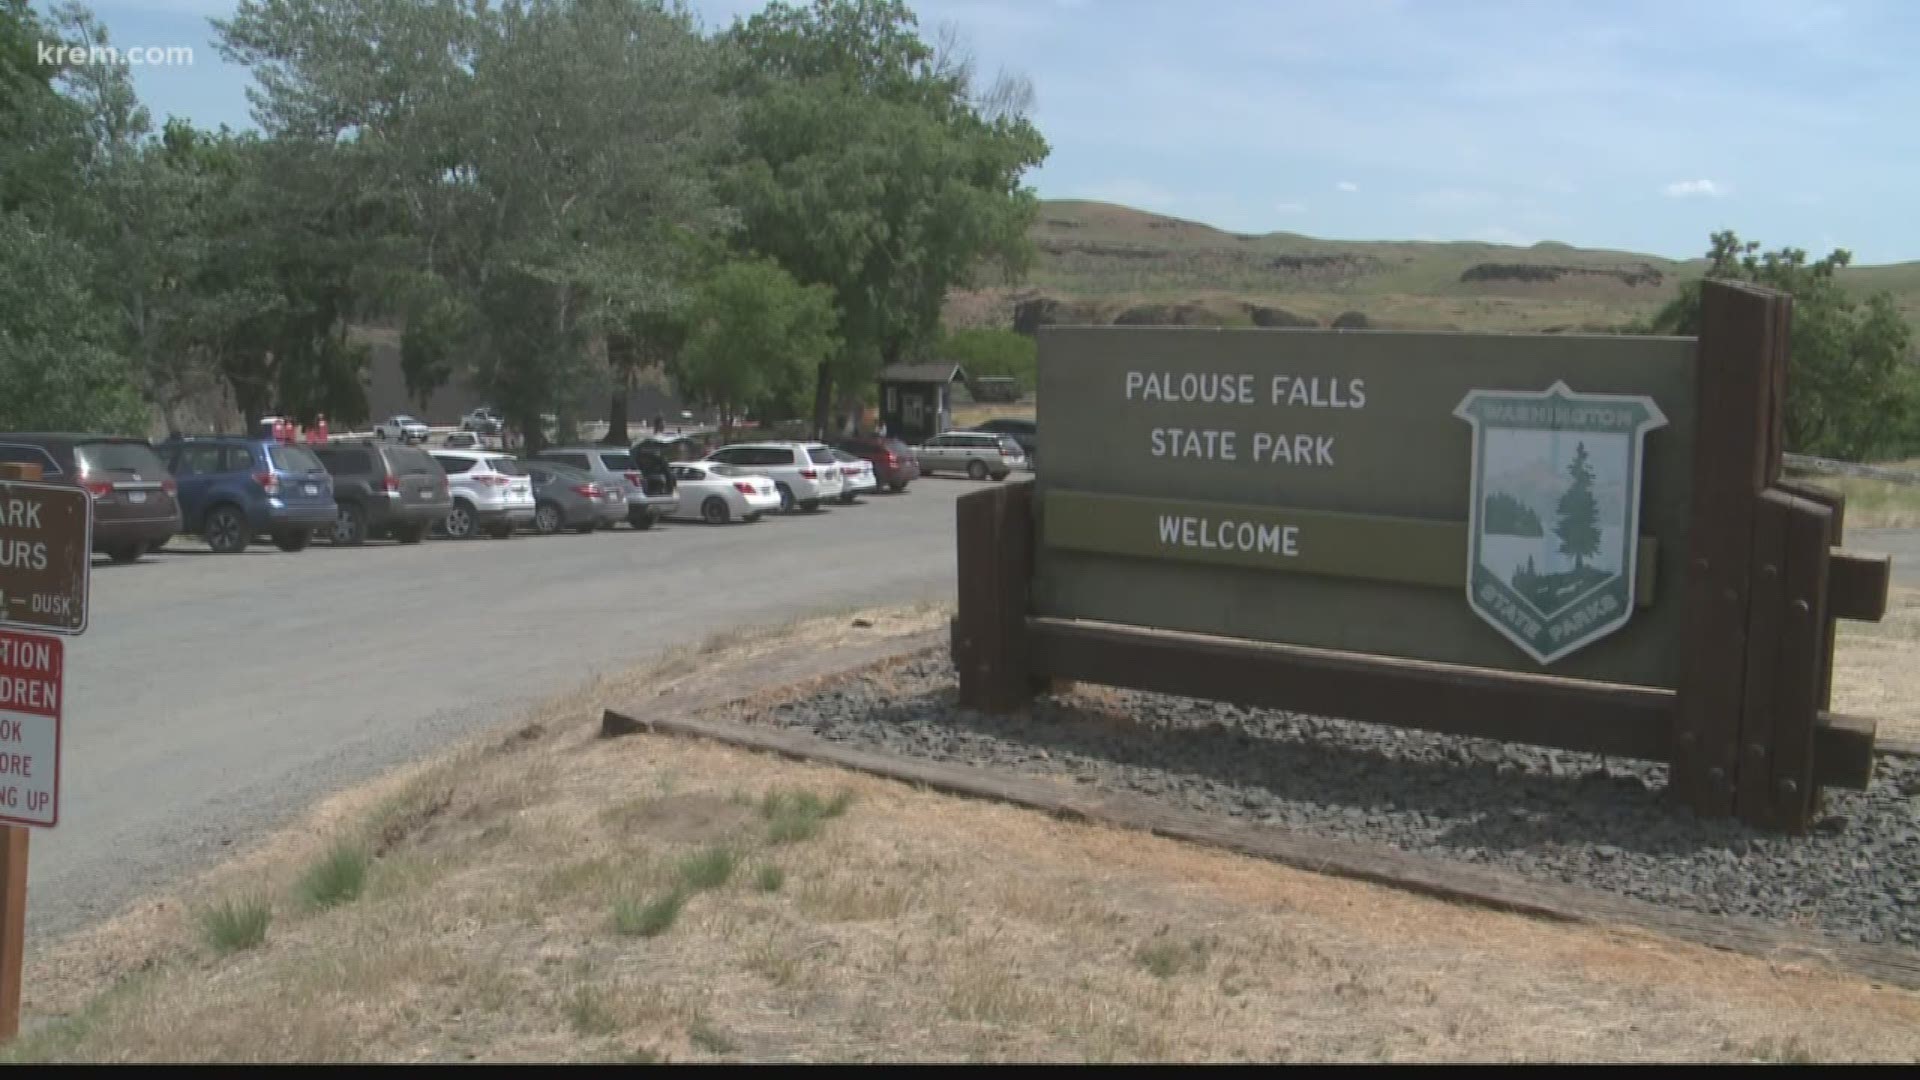 More signs, fencing added to Palouse Falls